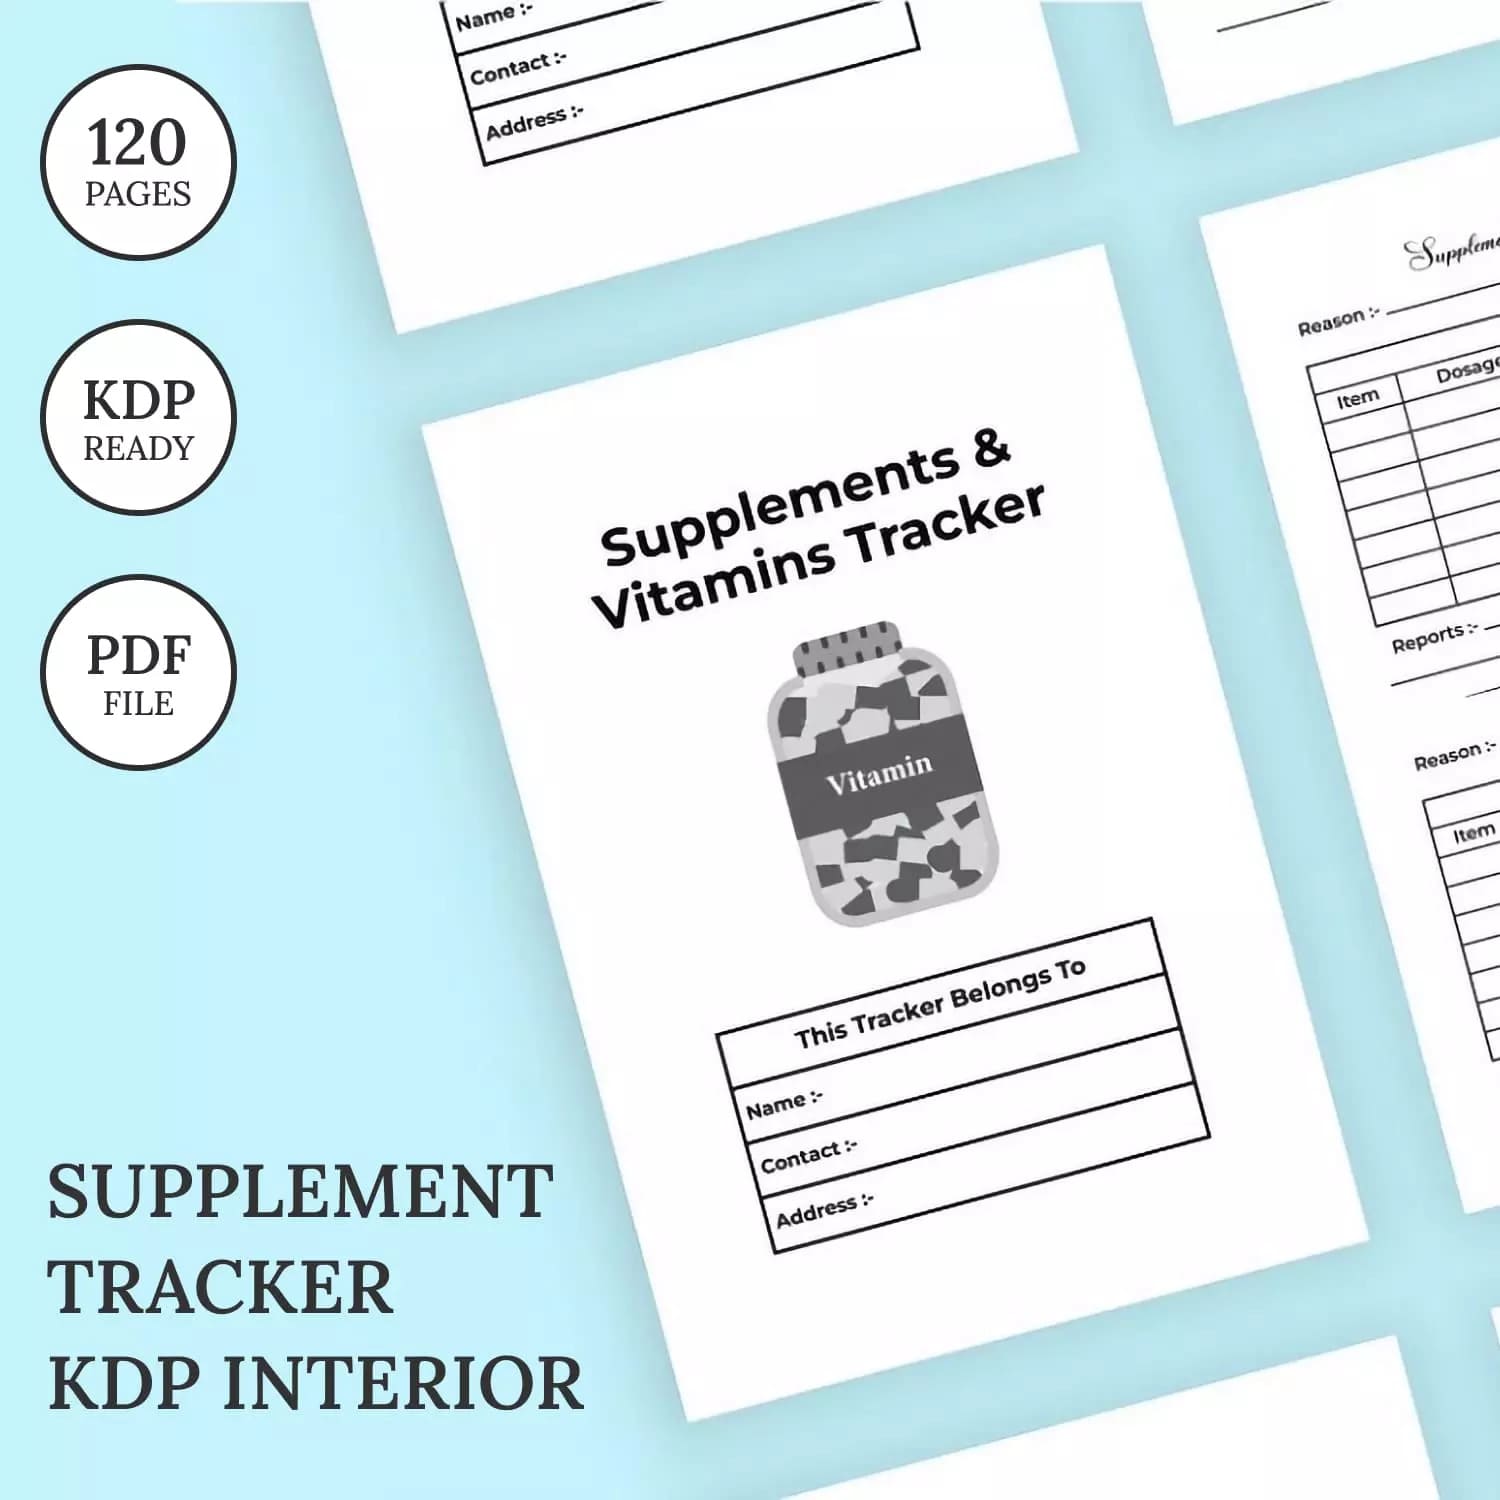 Supplement Tracker Kdp Interior Preview image.